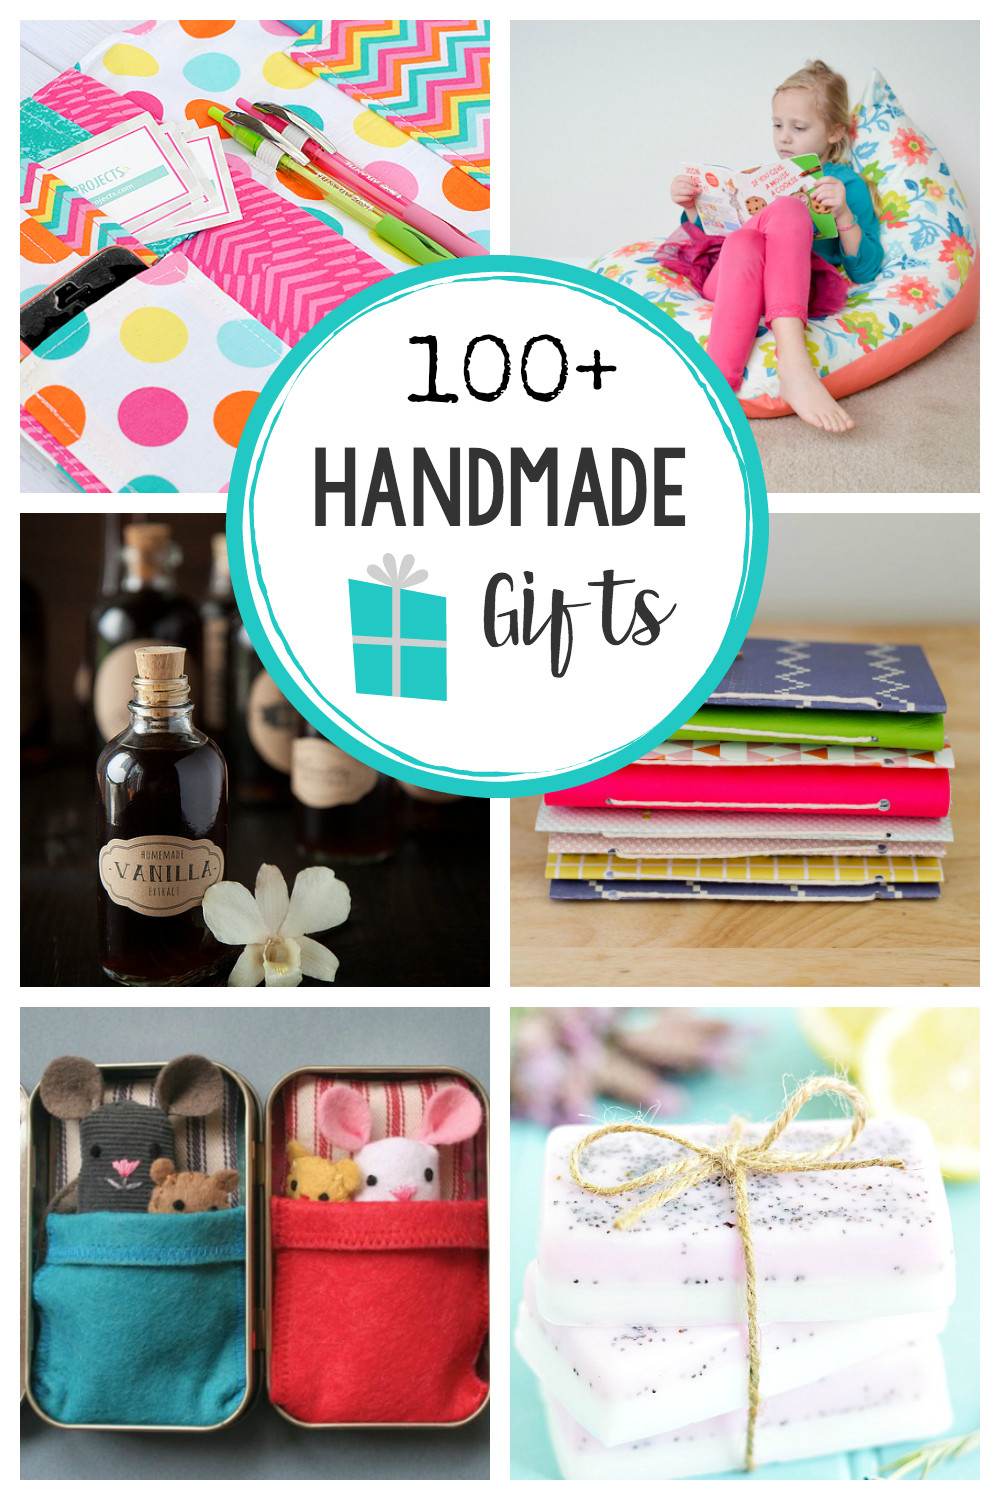 Birthday Diy Gifts
 Tons of Handmade Gifts 100 Ideas for Everyone on Your List